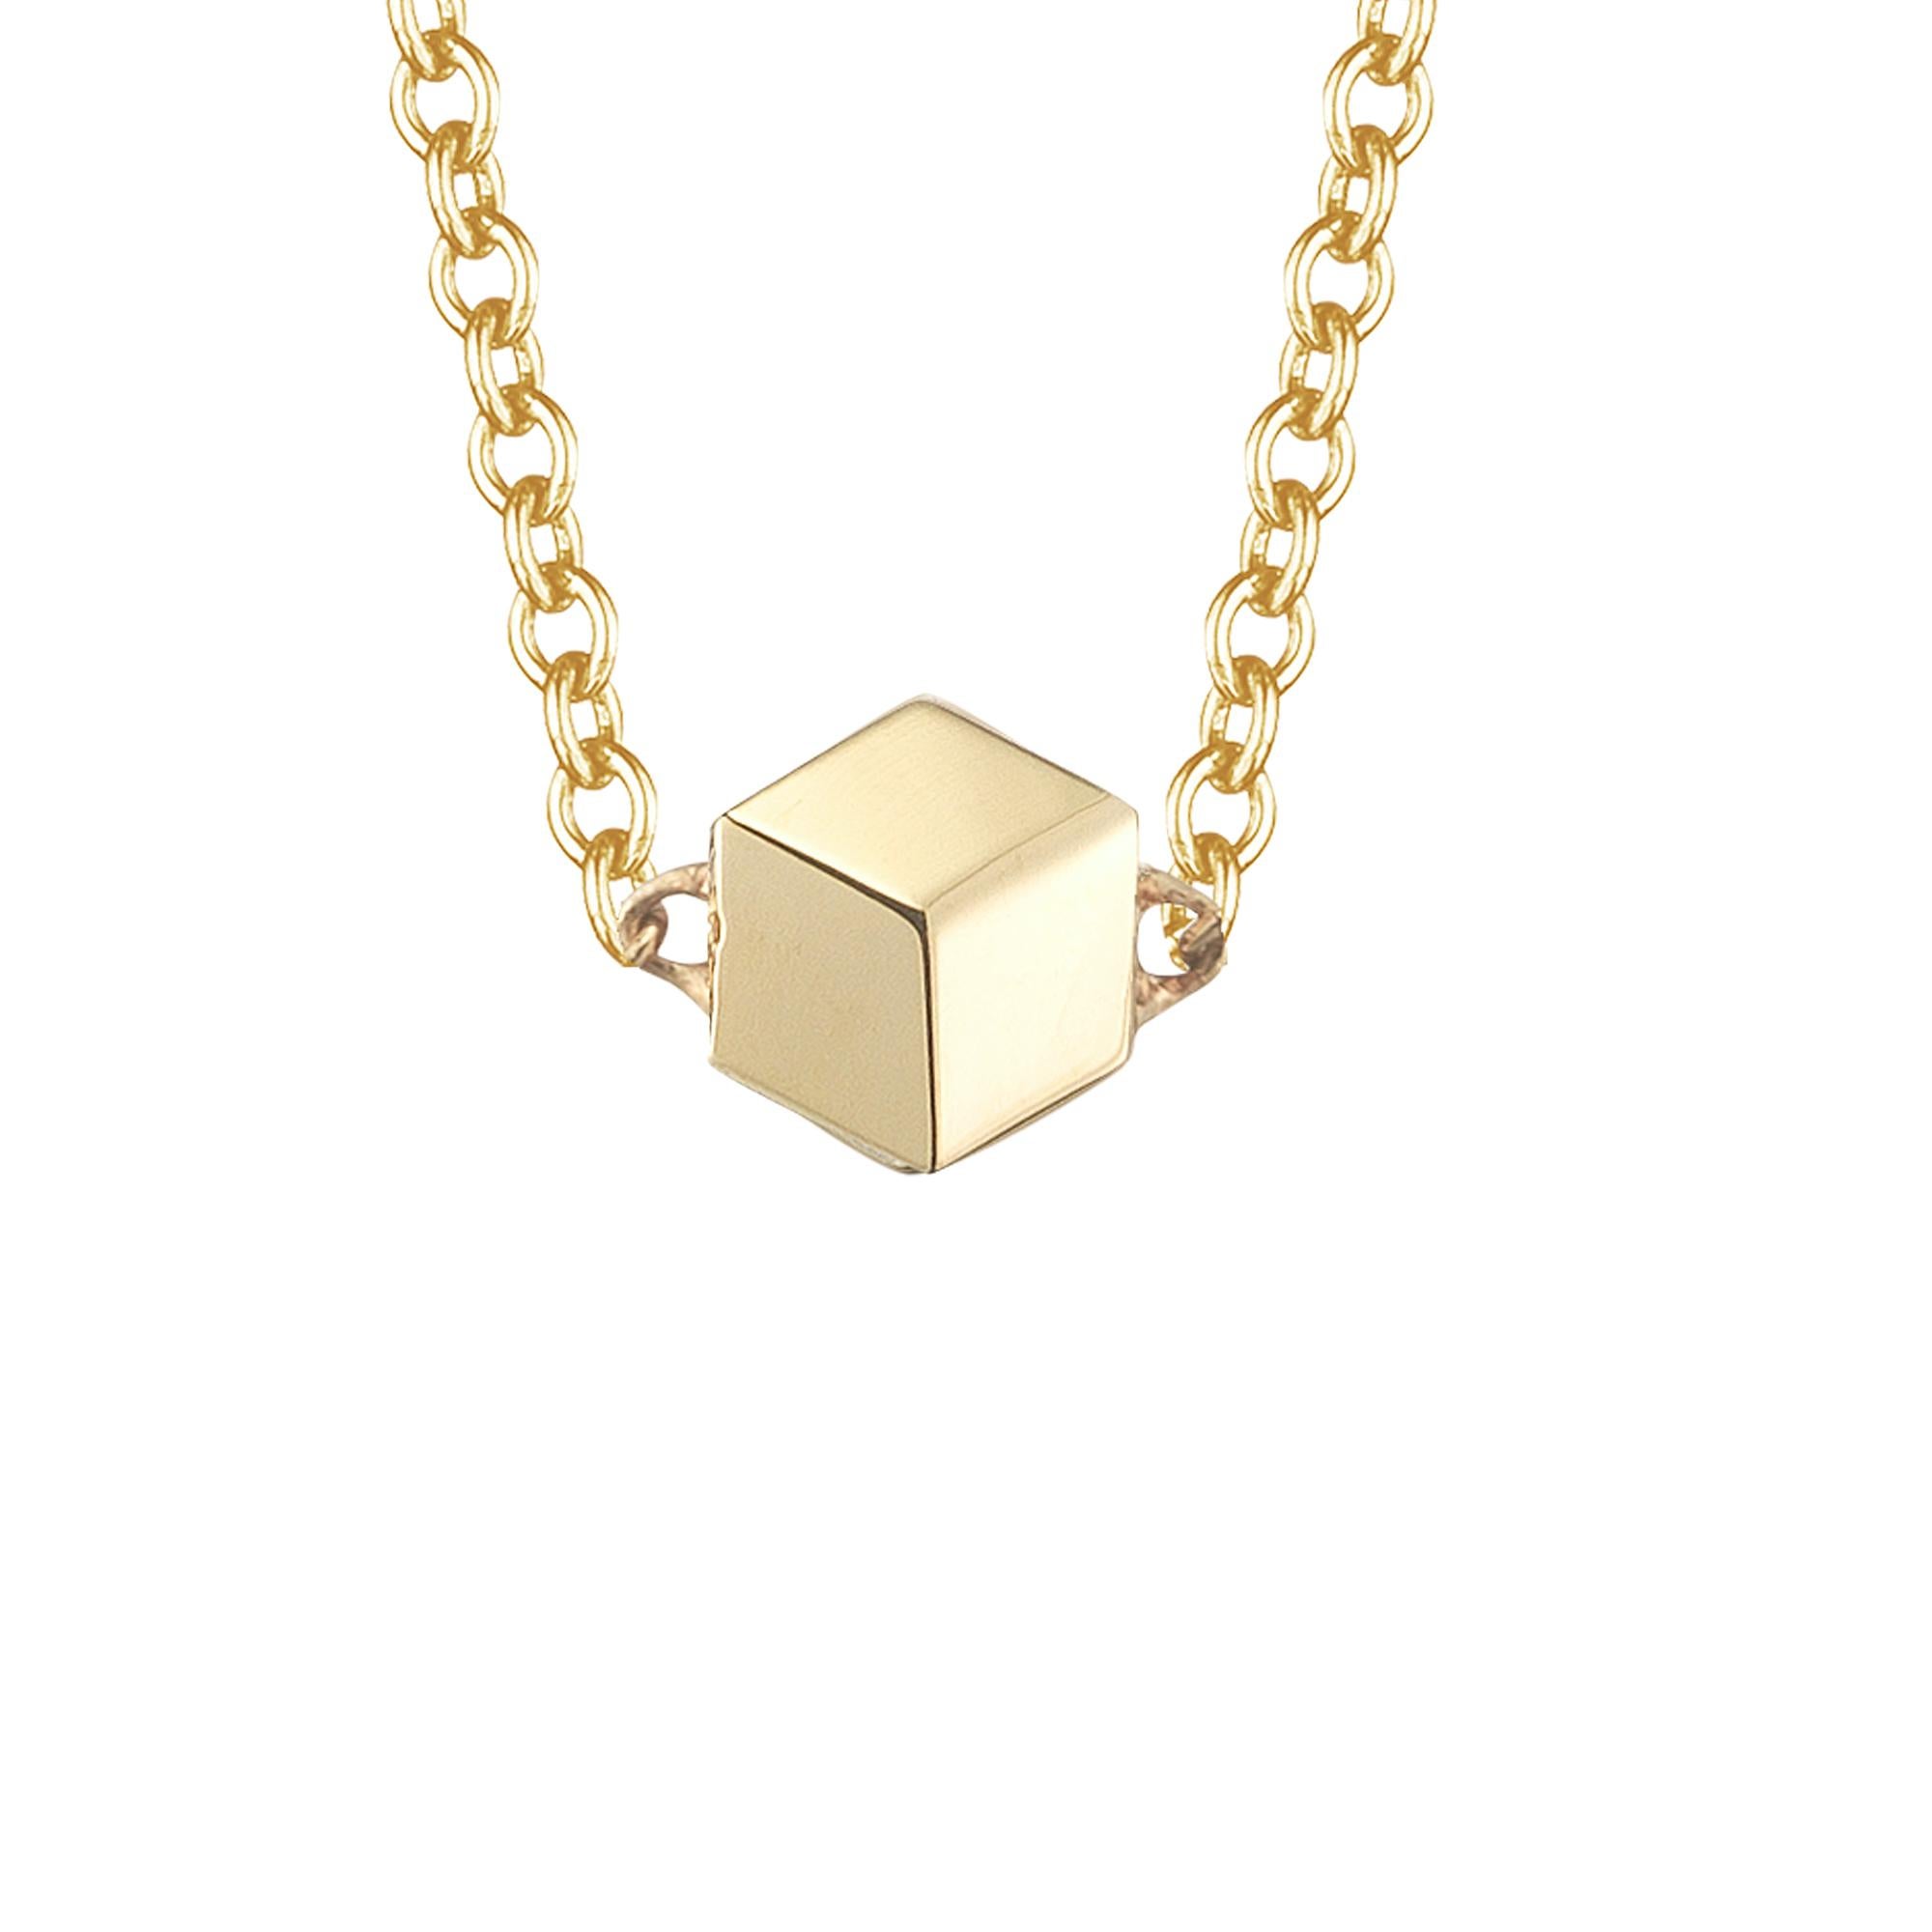 High polish 18kt yellow gold Brillante® pendant necklace.

Translated from a quintessential Venetian motif, the Brillante® jewelry collection combines strong jewelry design, cutting edge technology and fine engineering.

A bracelet from this iconic